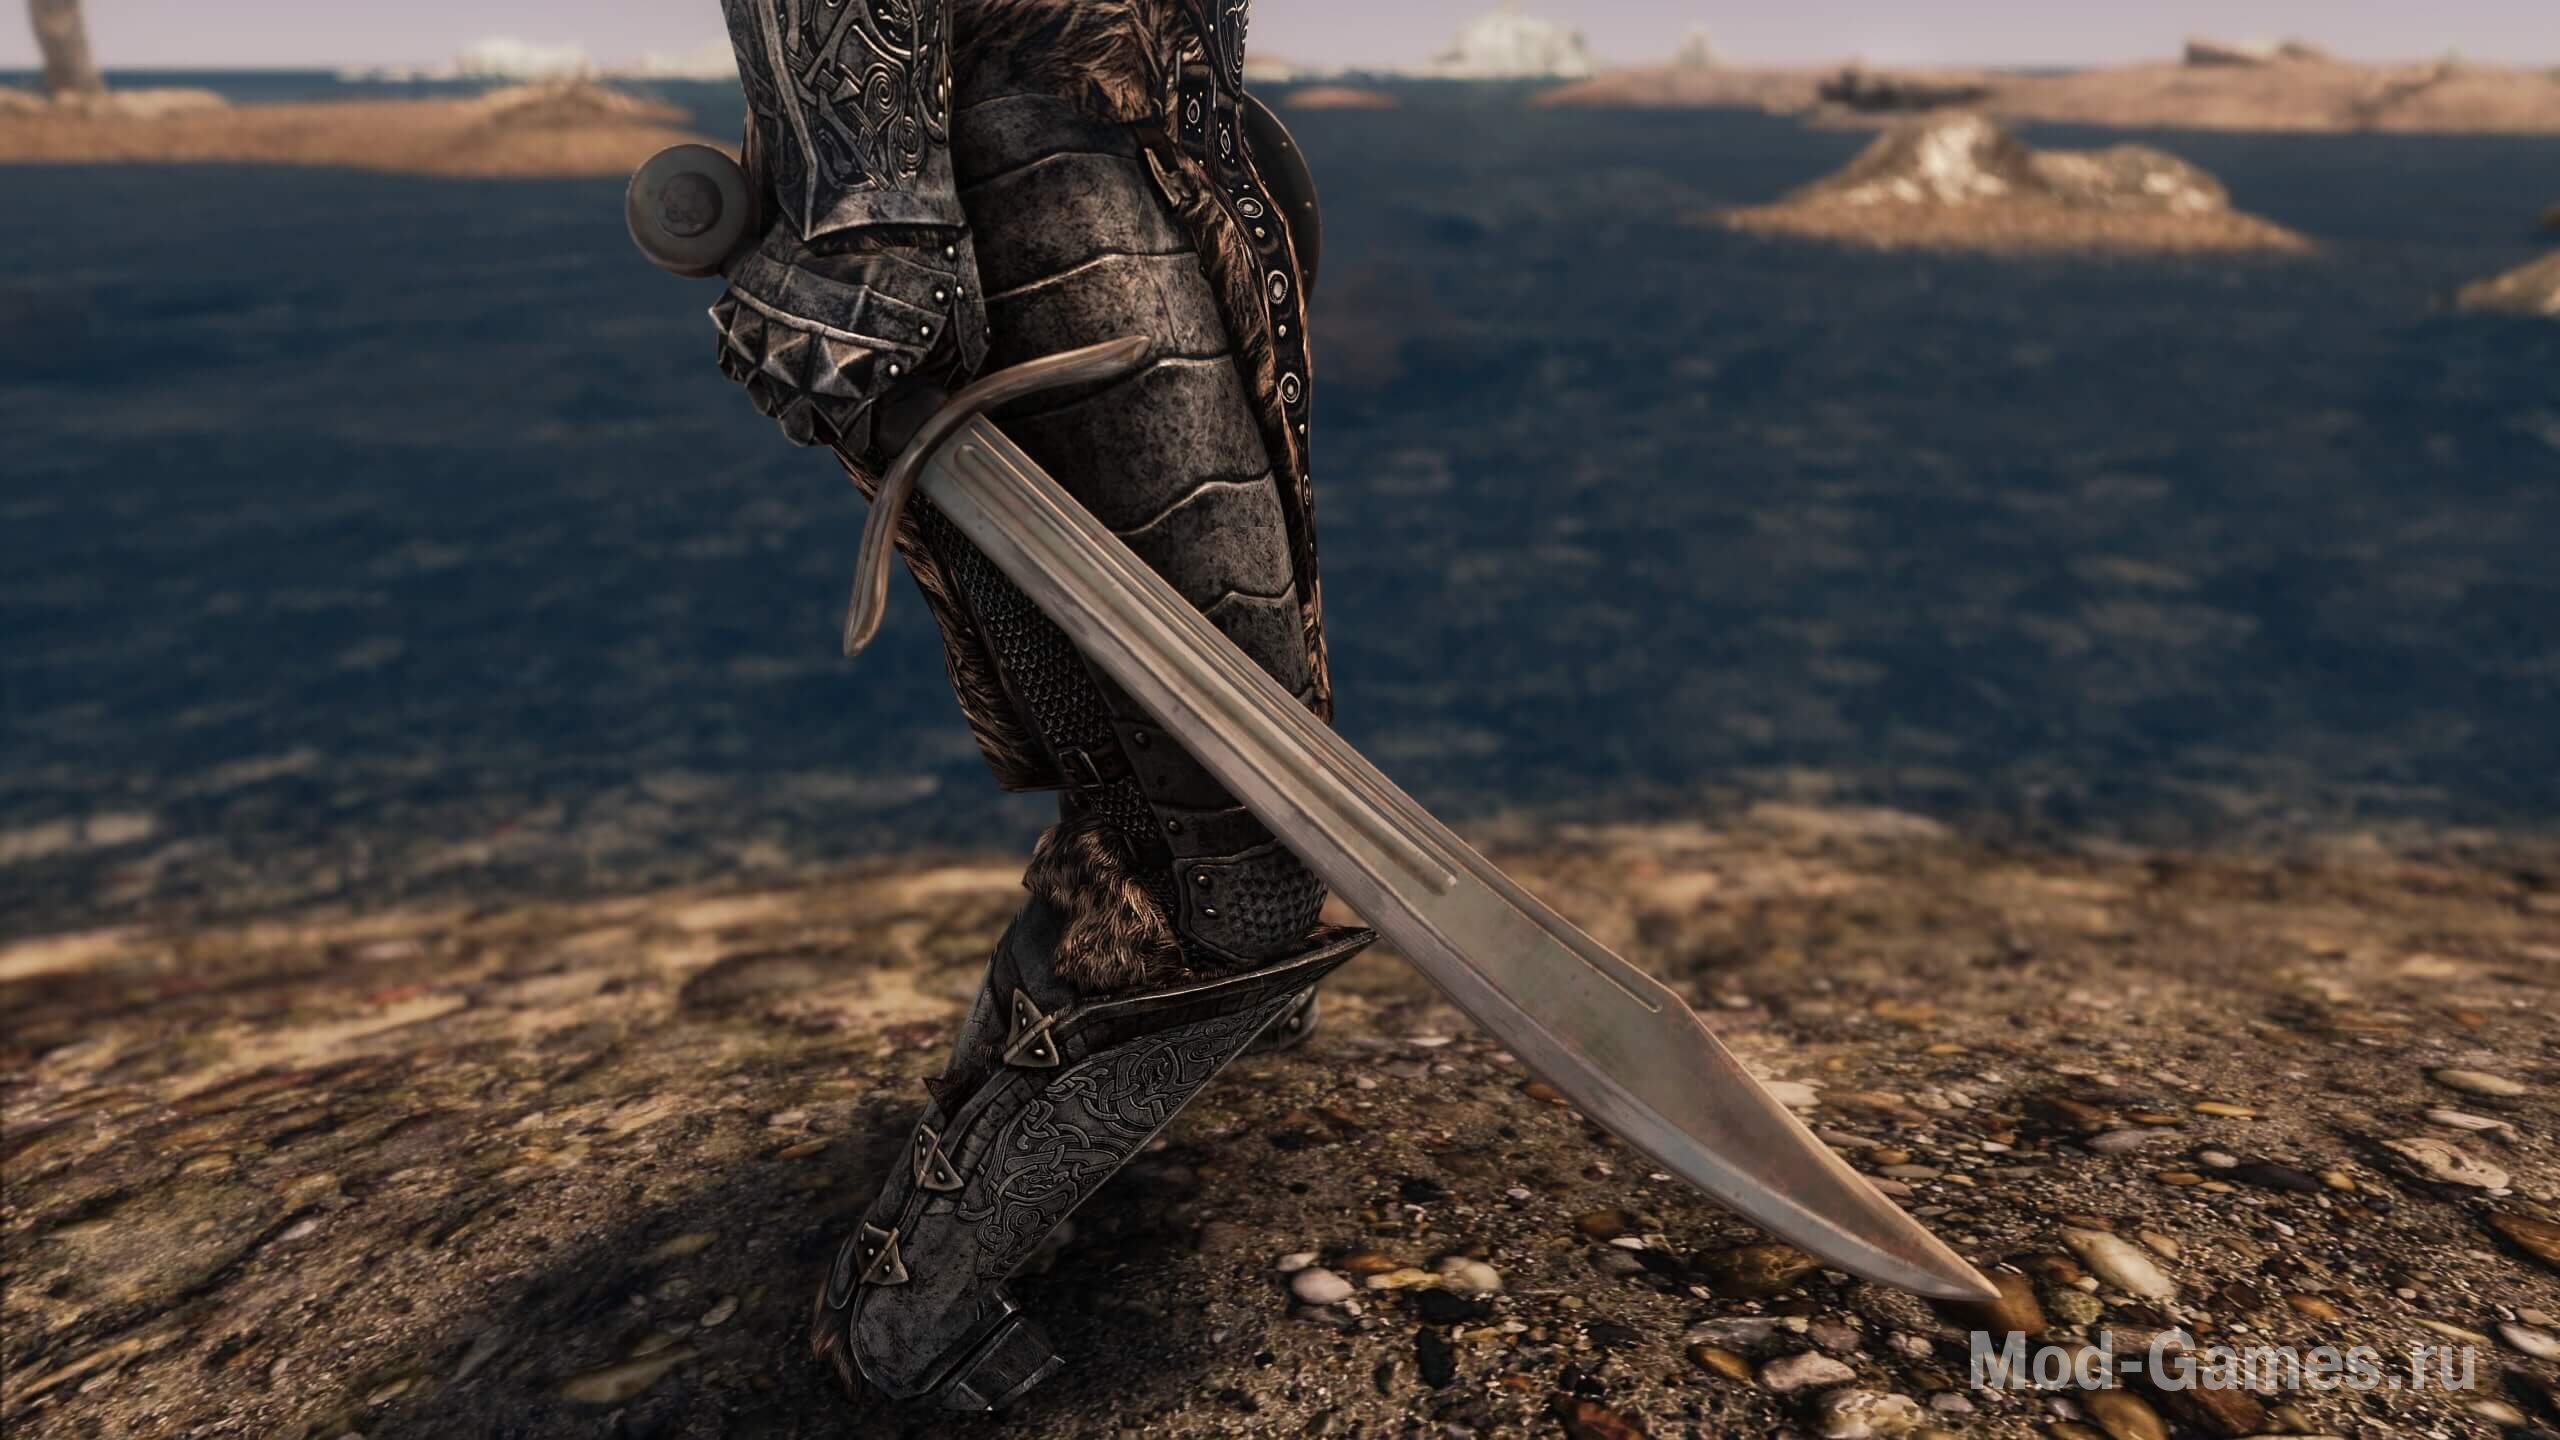 decent ancient nord armour and weapons for tes v skyrim.